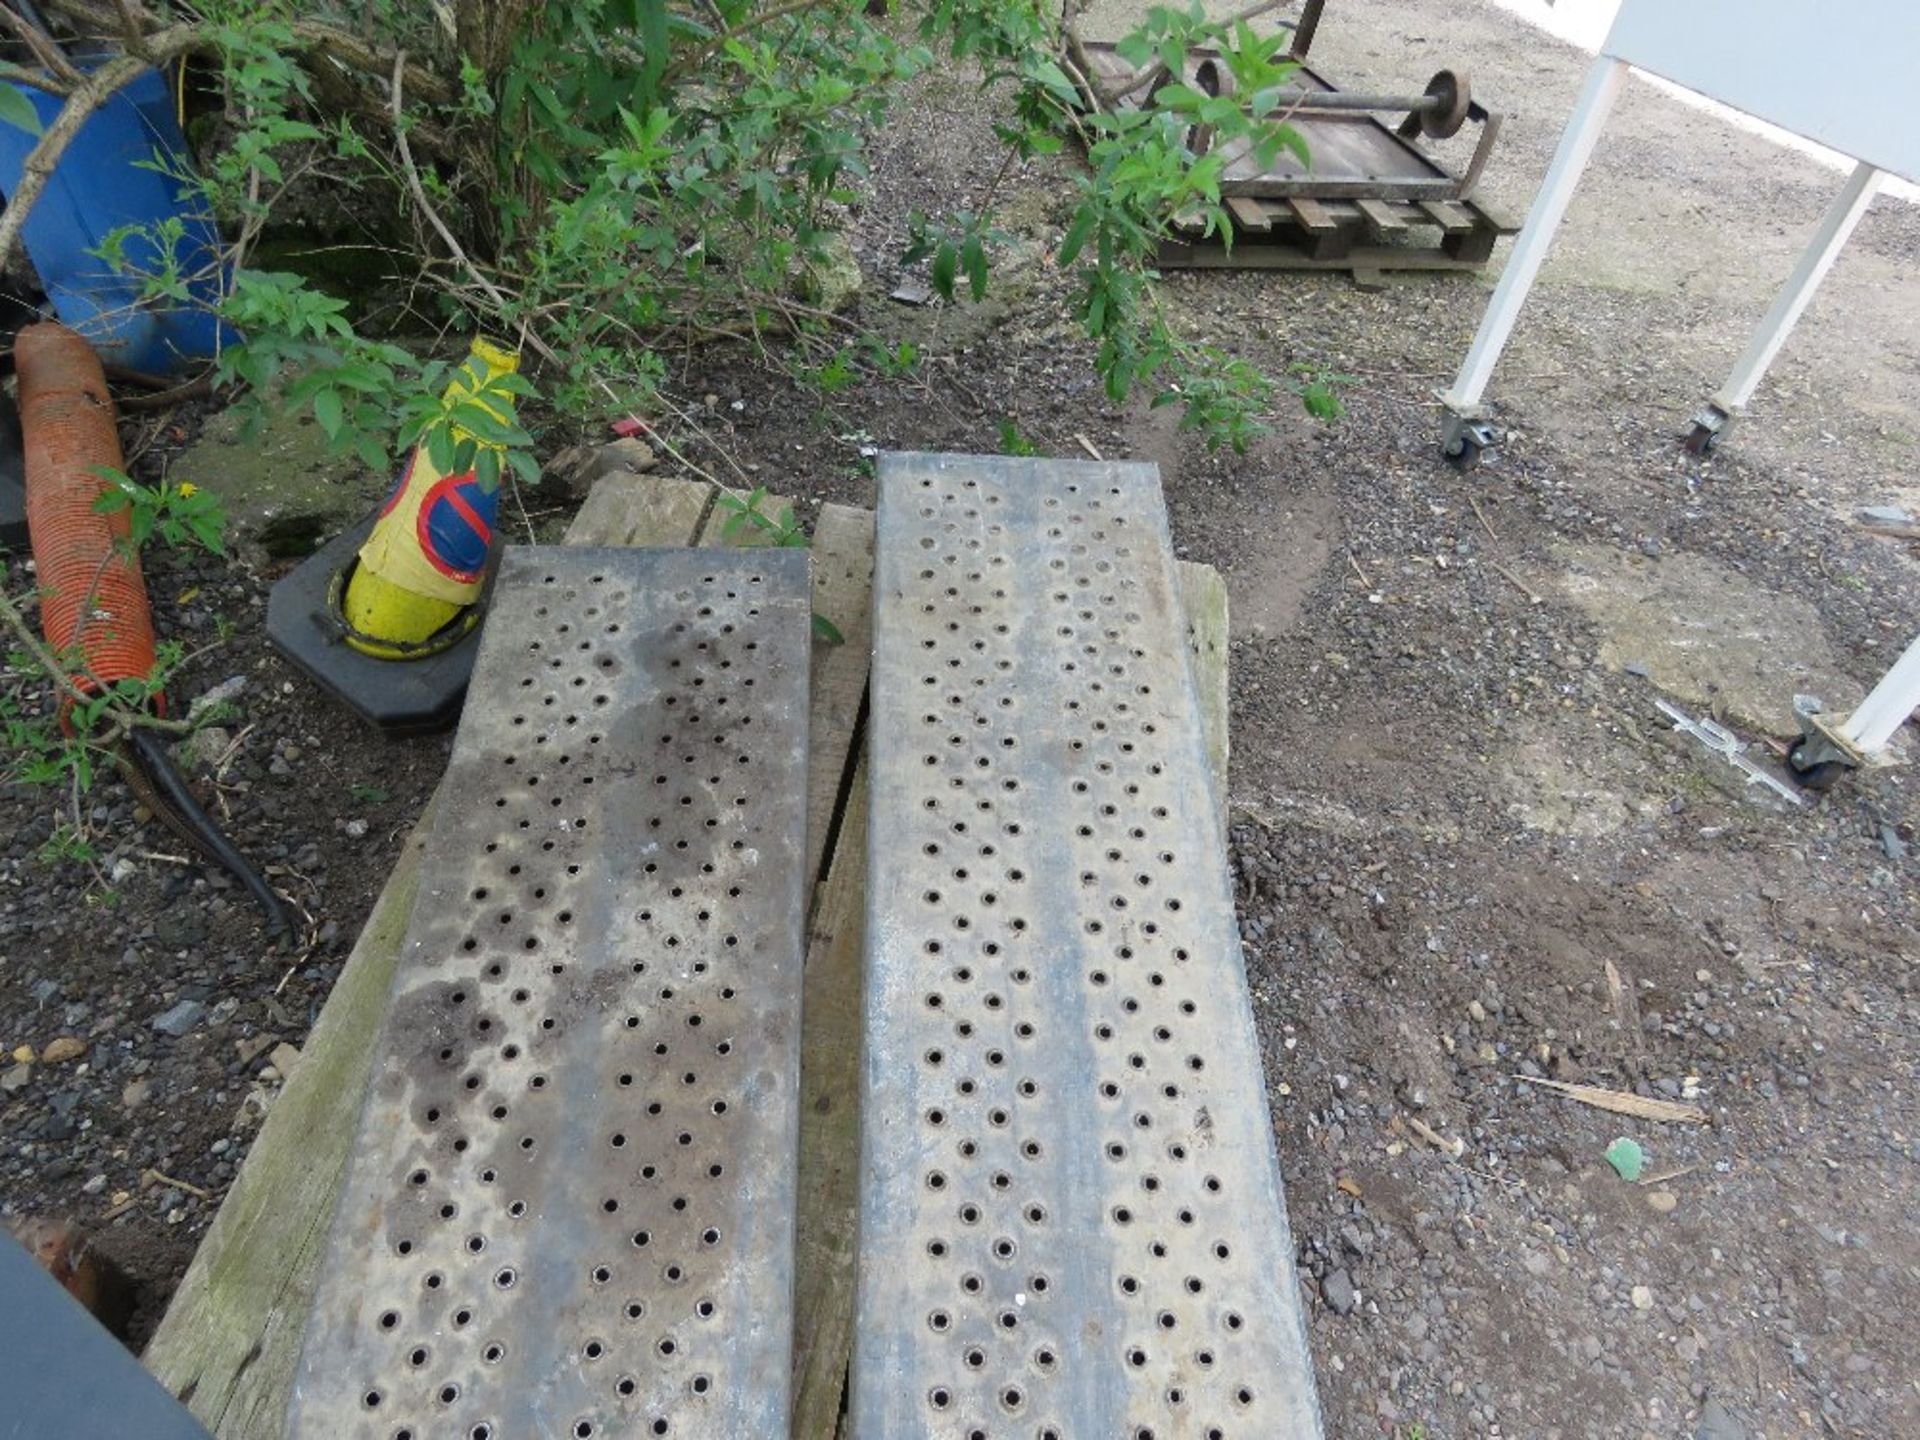 PAIR OF STEEL LOADING RAMPS 8FT LENGTH APPROX. - Image 4 of 7